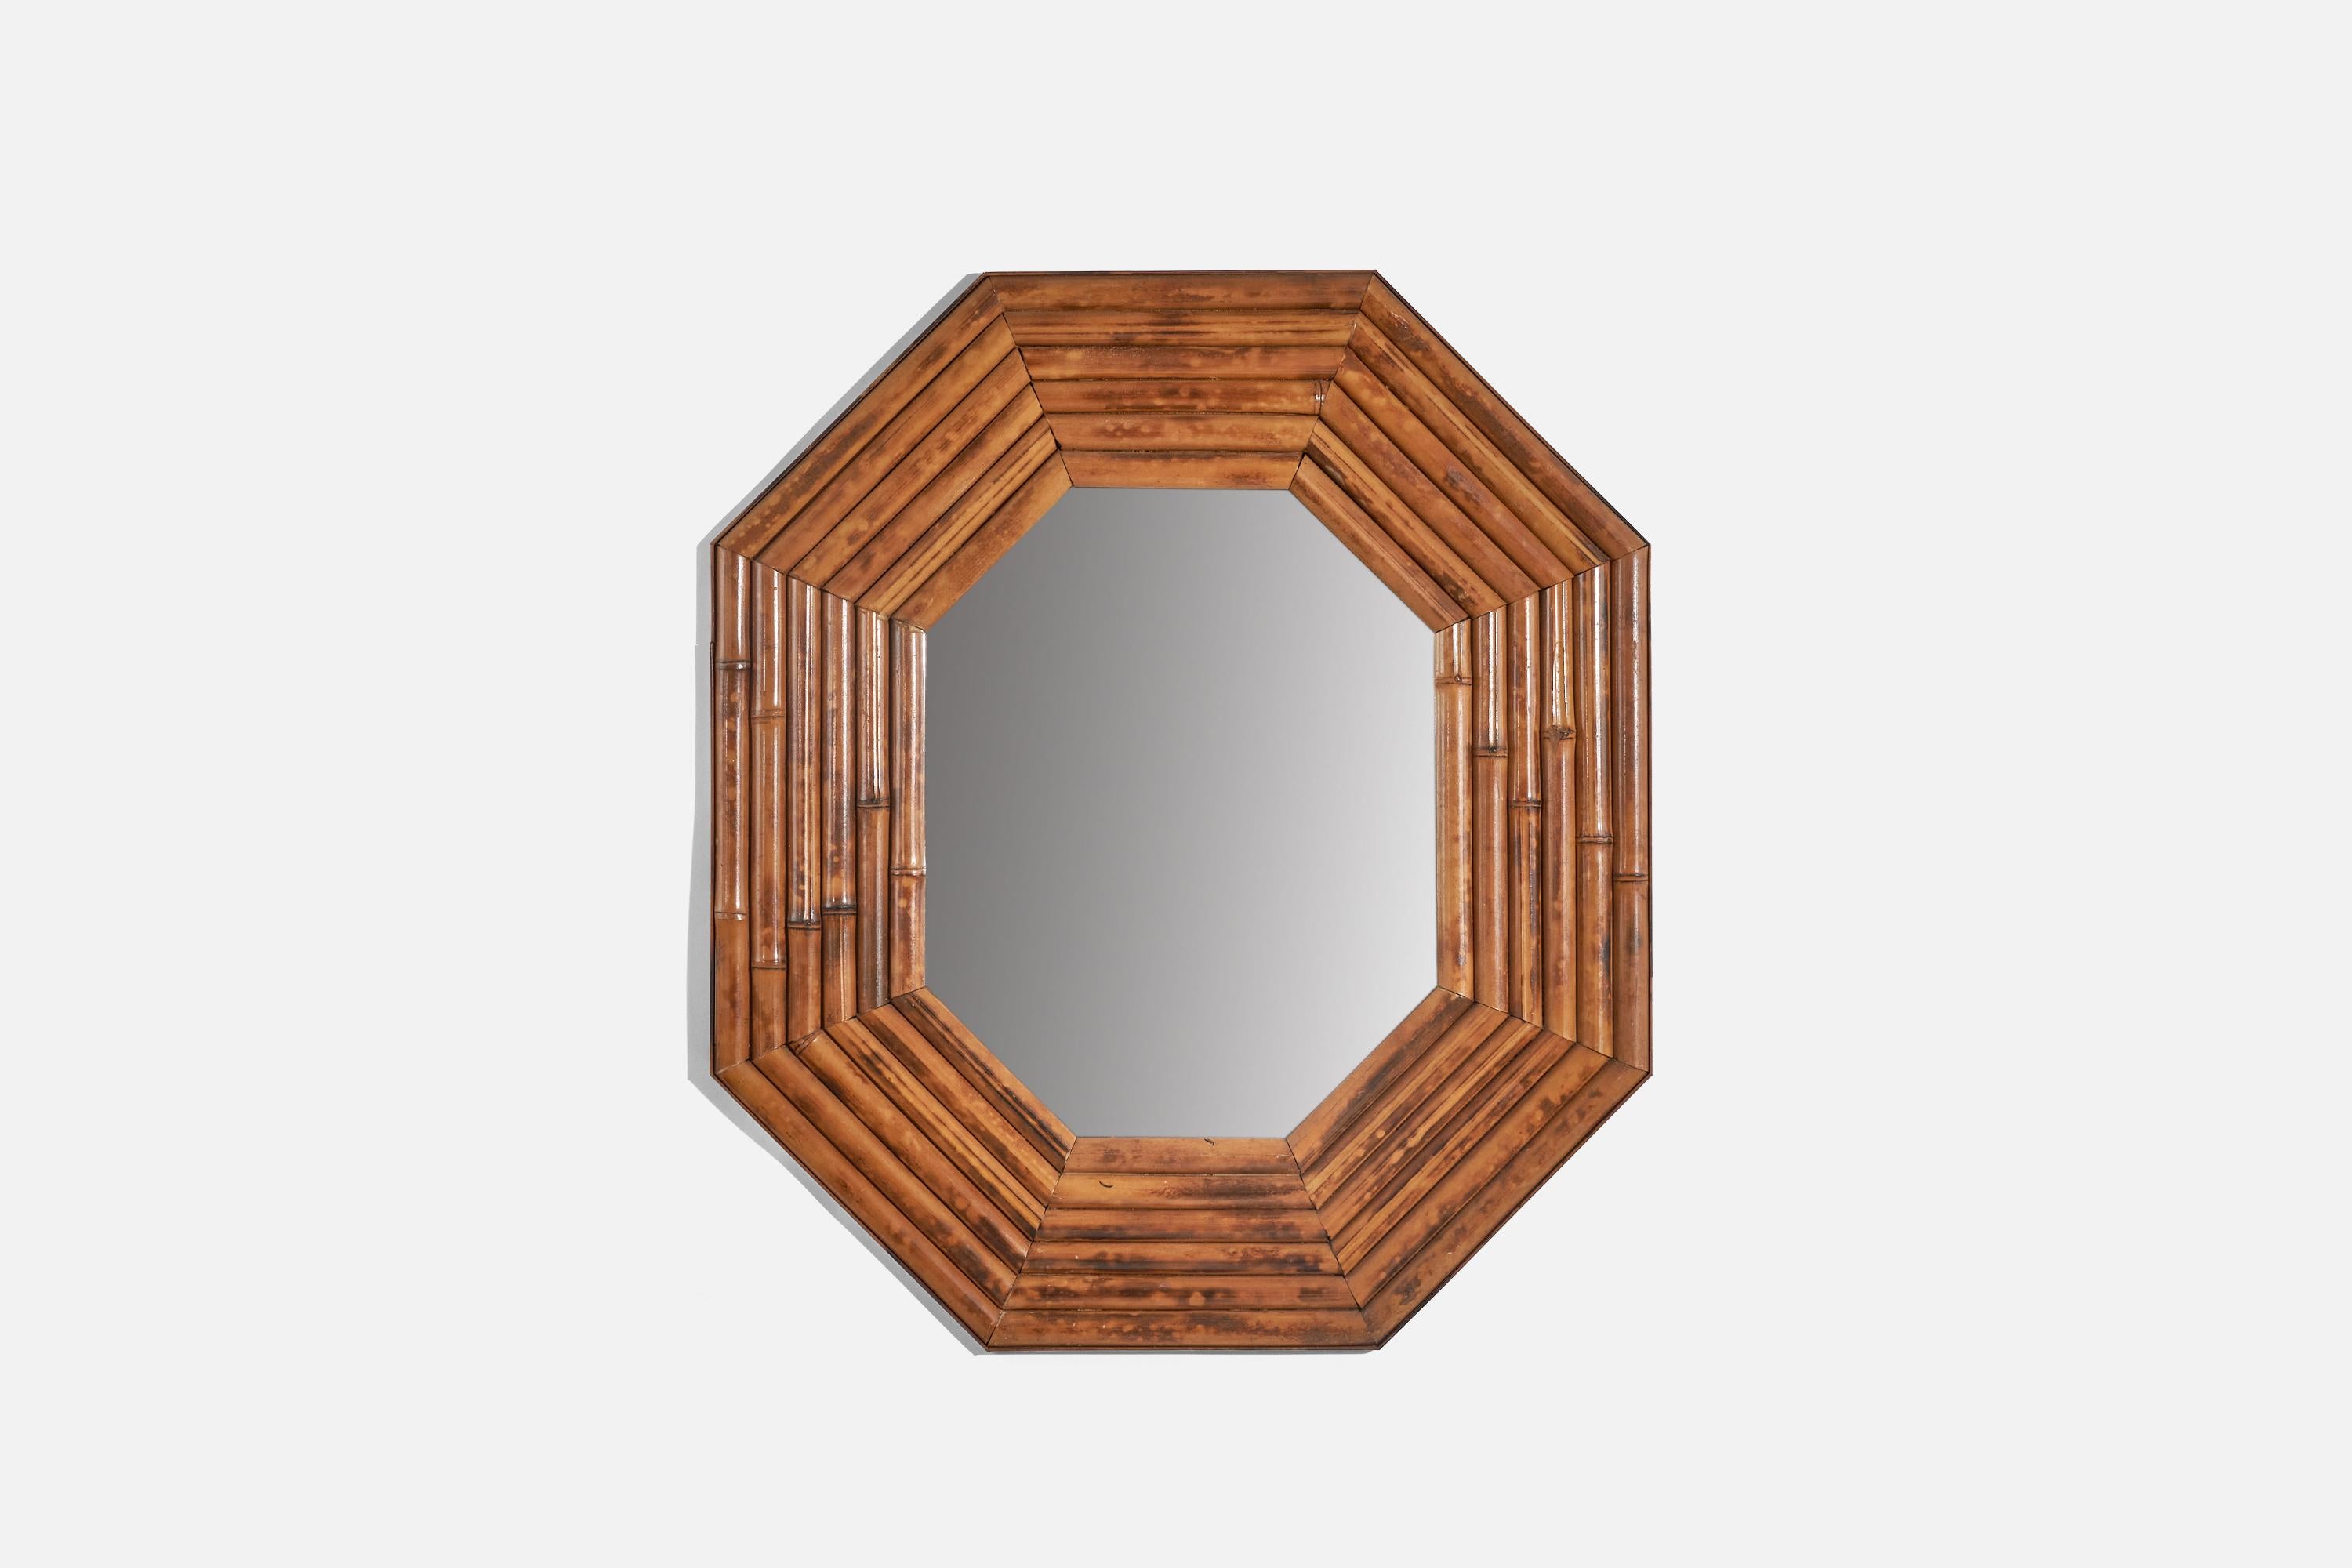 A bamboo wall mirror designed and produced by an American designer, United States, c. 1950s.